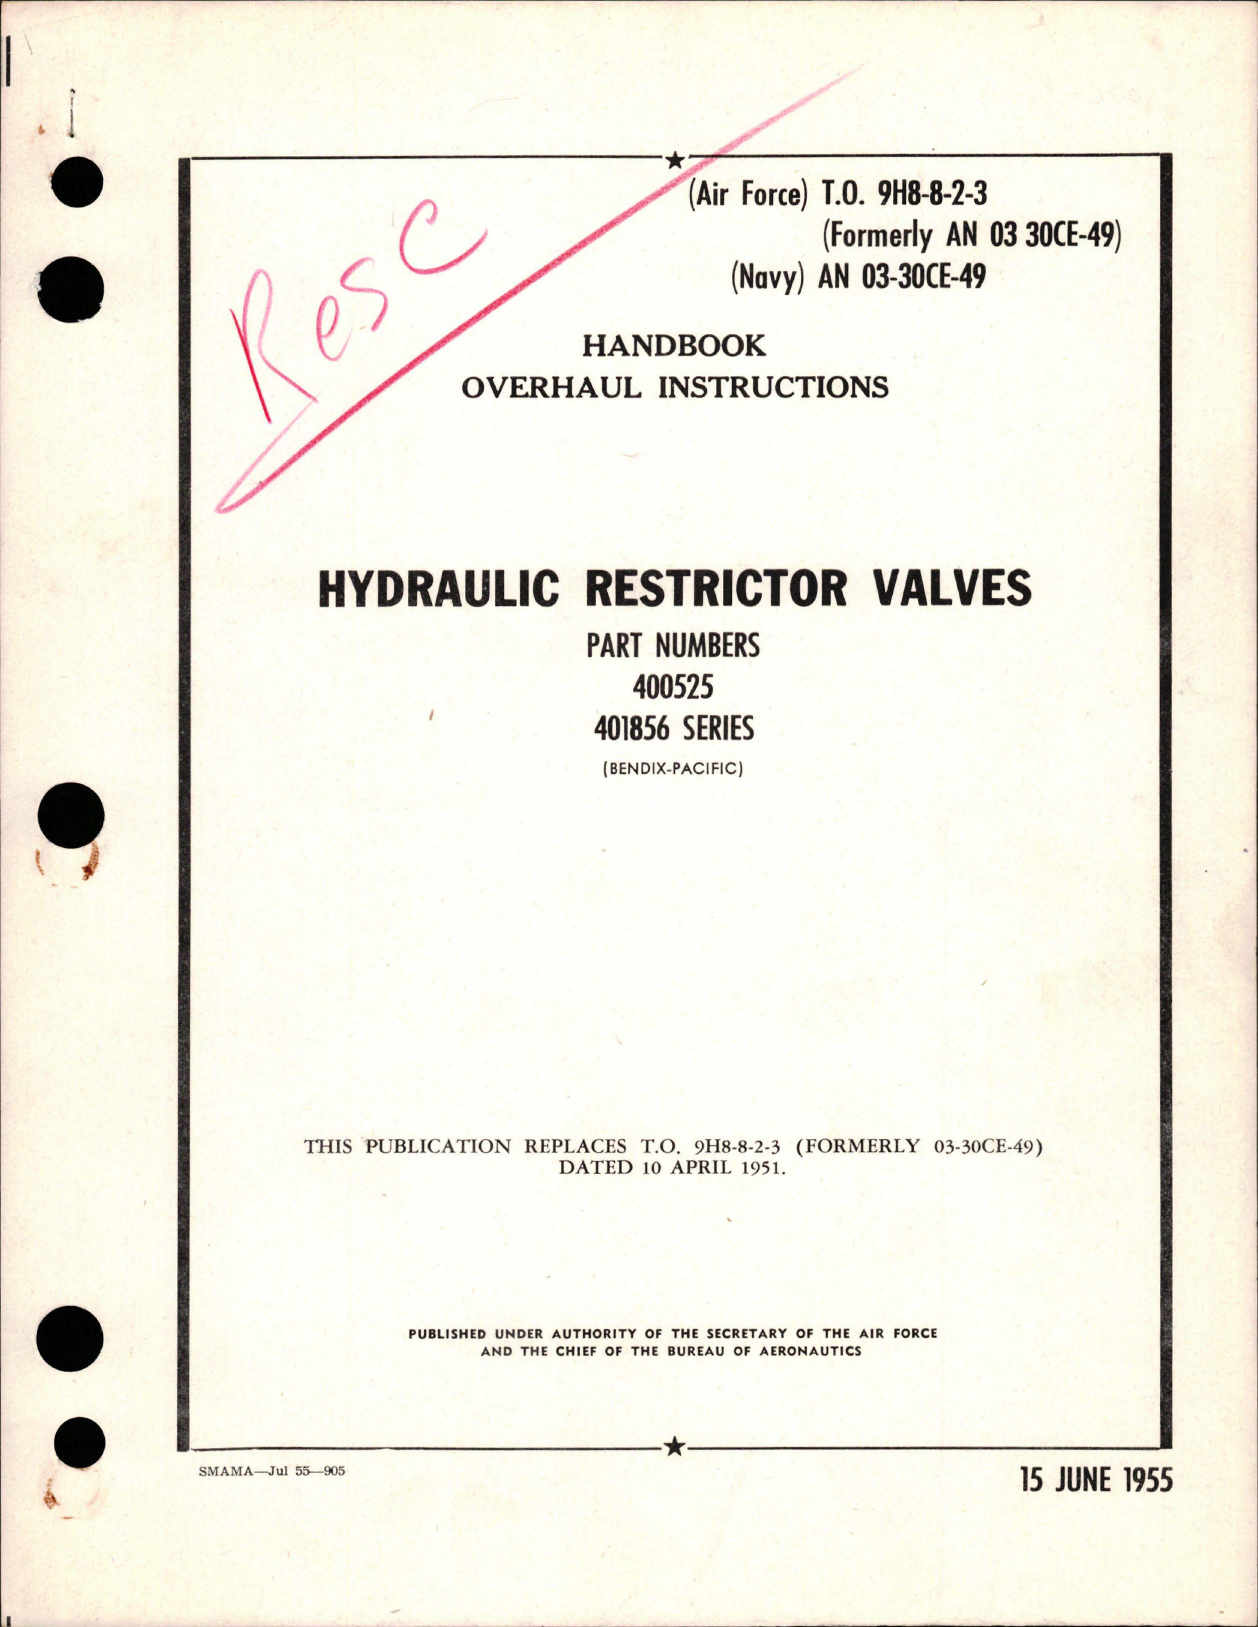 Sample page 1 from AirCorps Library document: Overhaul Instructions for Hydraulic Restrictor Valves - Parts 400525 and 401856 Series 